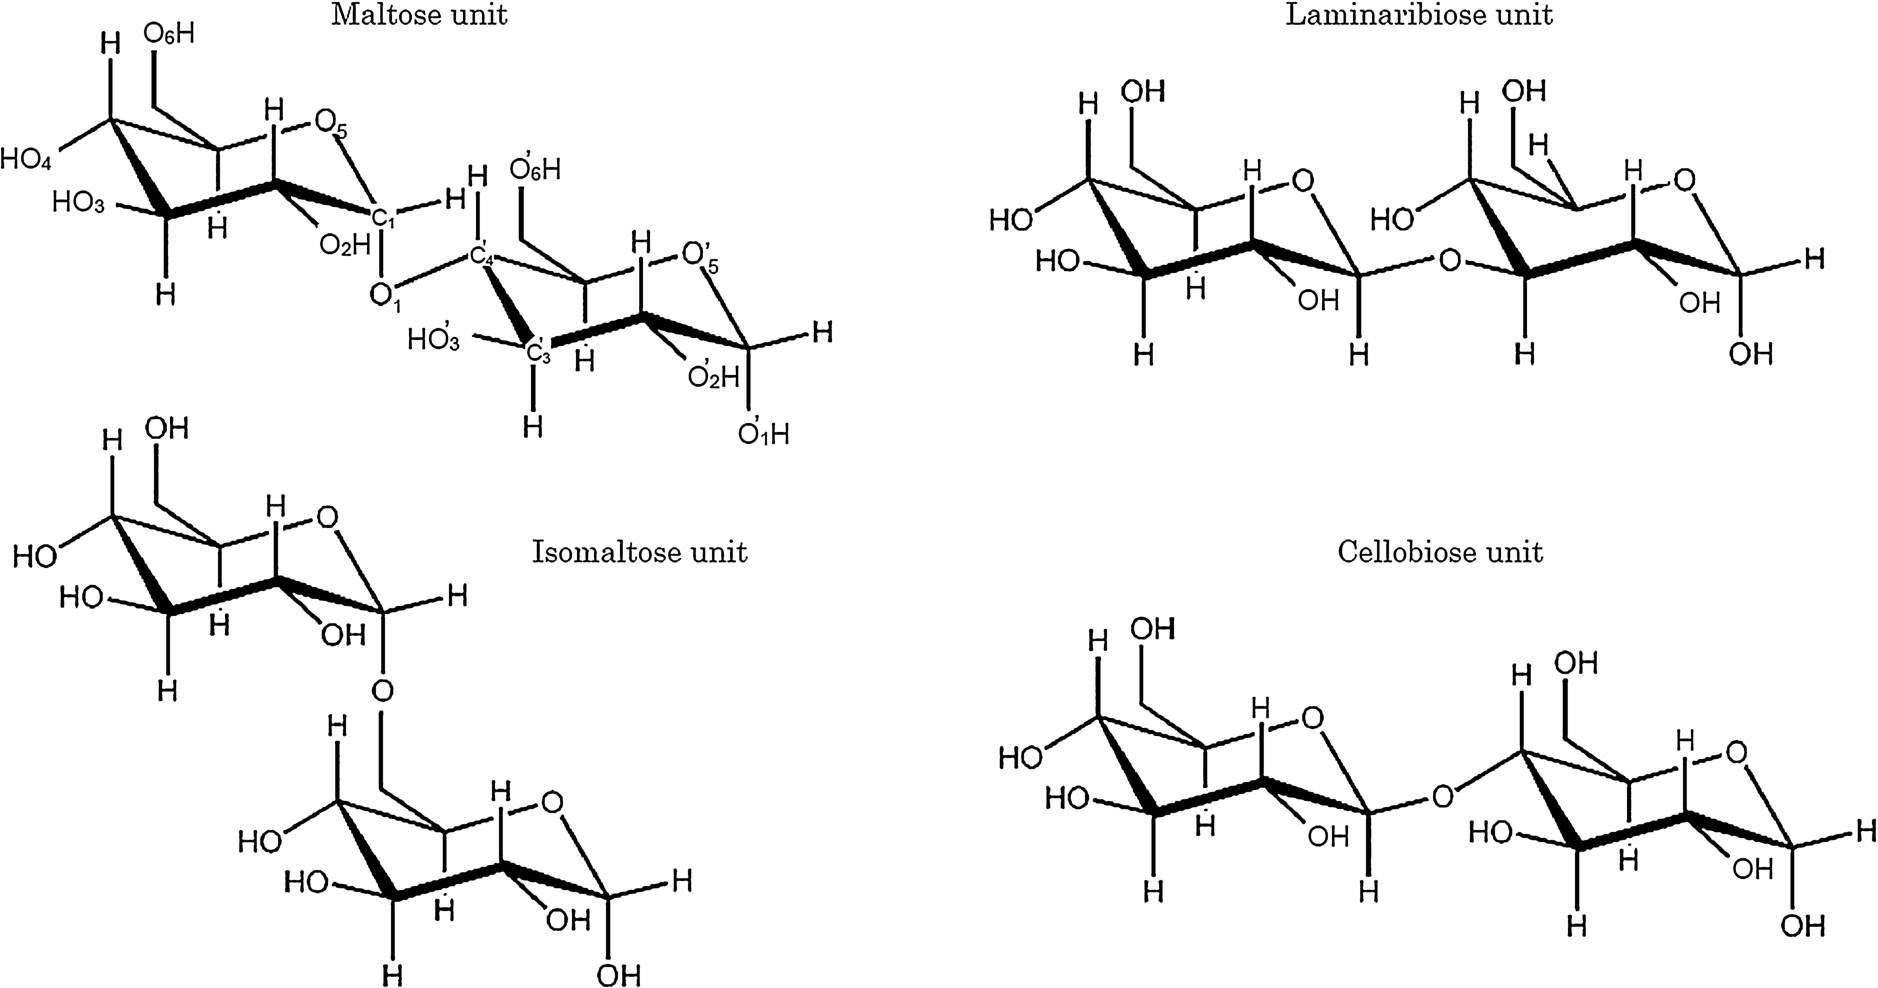 Chemical structures of disaccharide units of the malto-, laminari-, isomalto-, and cello-oligosaccharide series examined in this study.